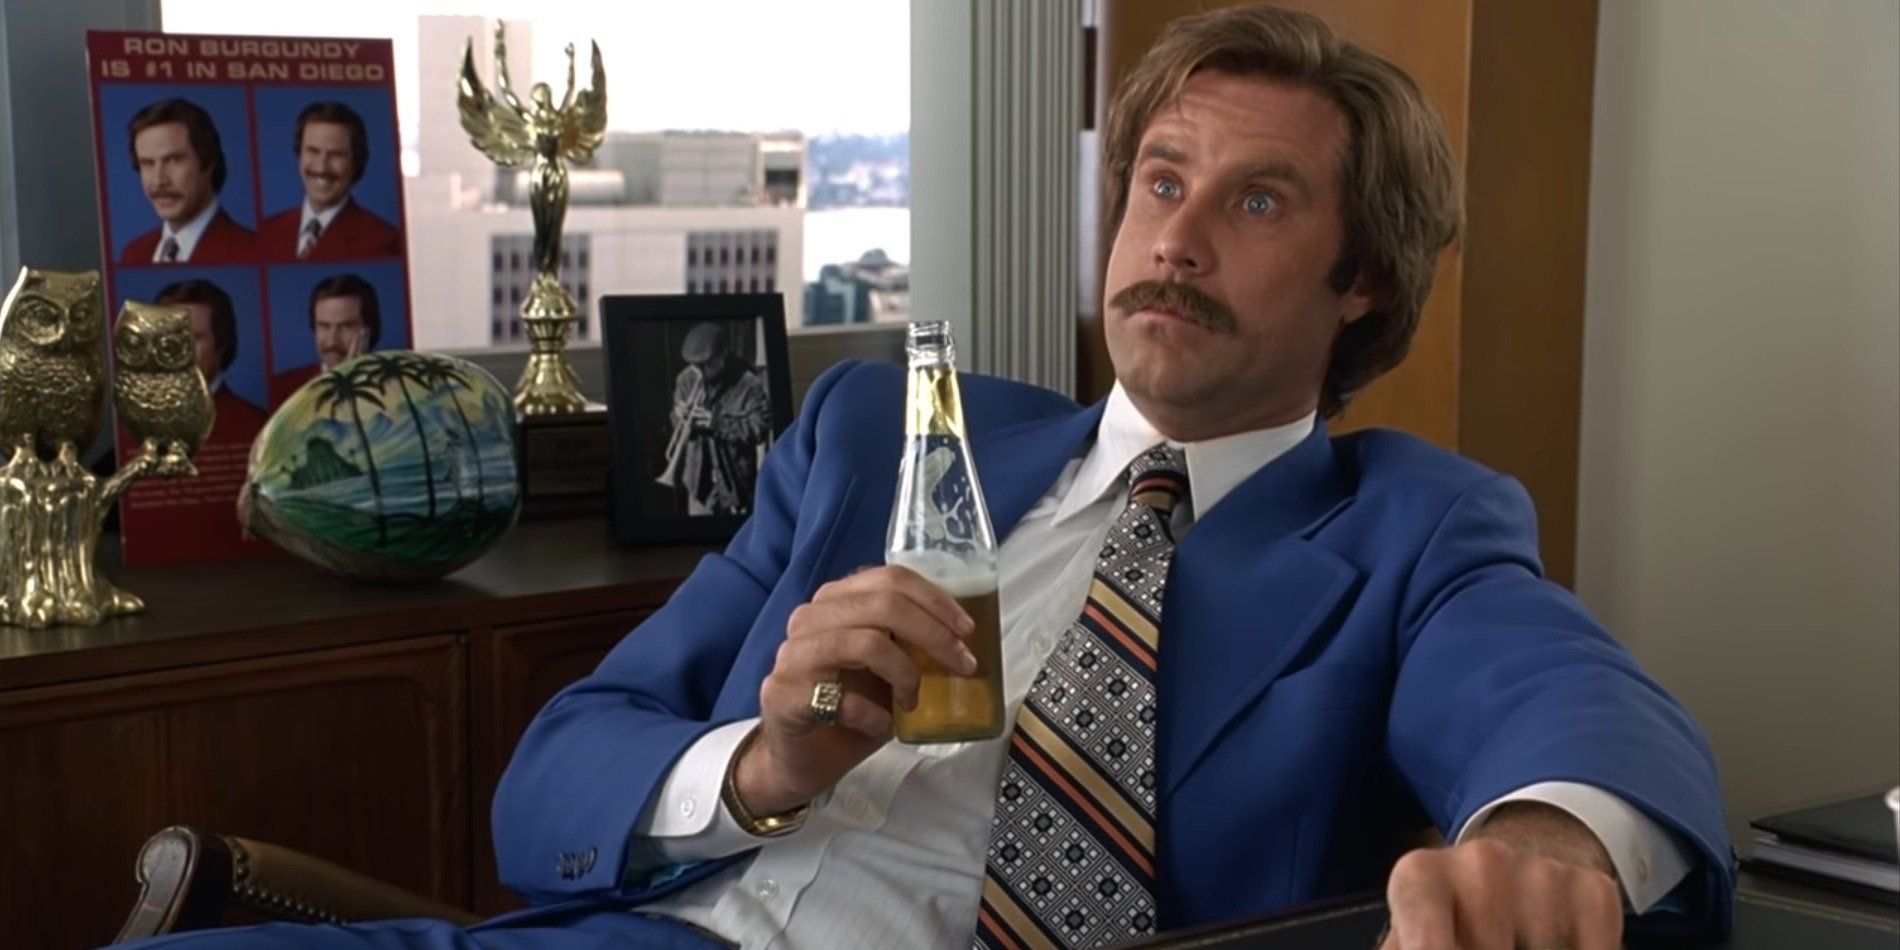 Ron Burgundy at his desk drinking some alcohol after the massive news station battle 